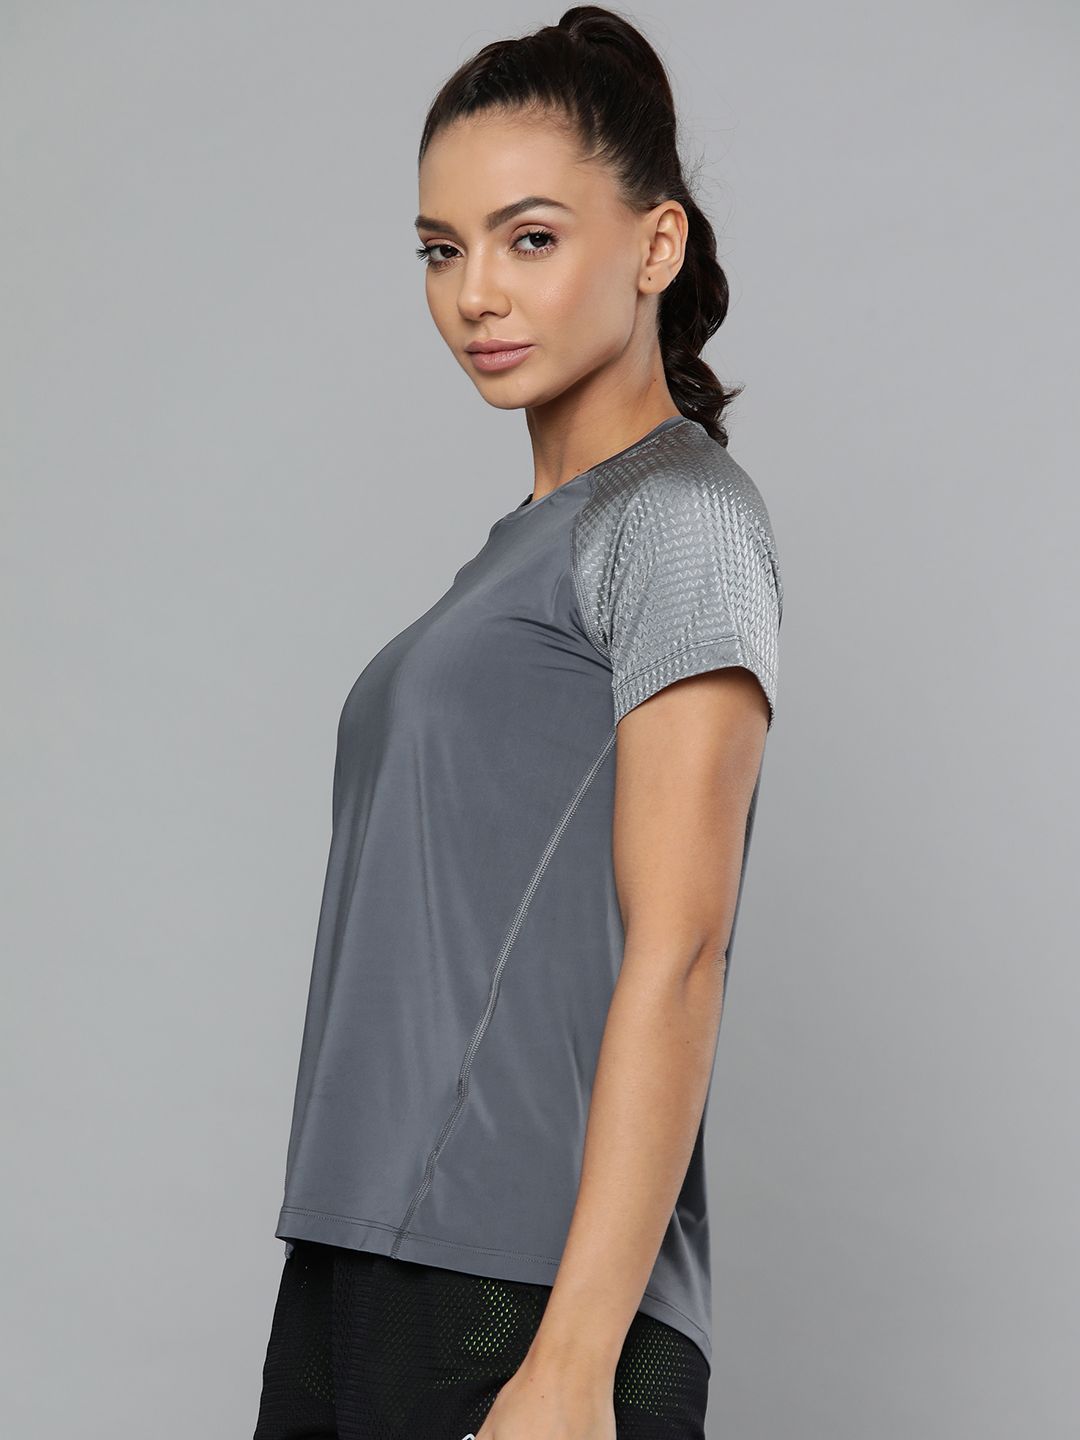 Fitkin Women Grey Solid Training or Gym T-shirt Price in India